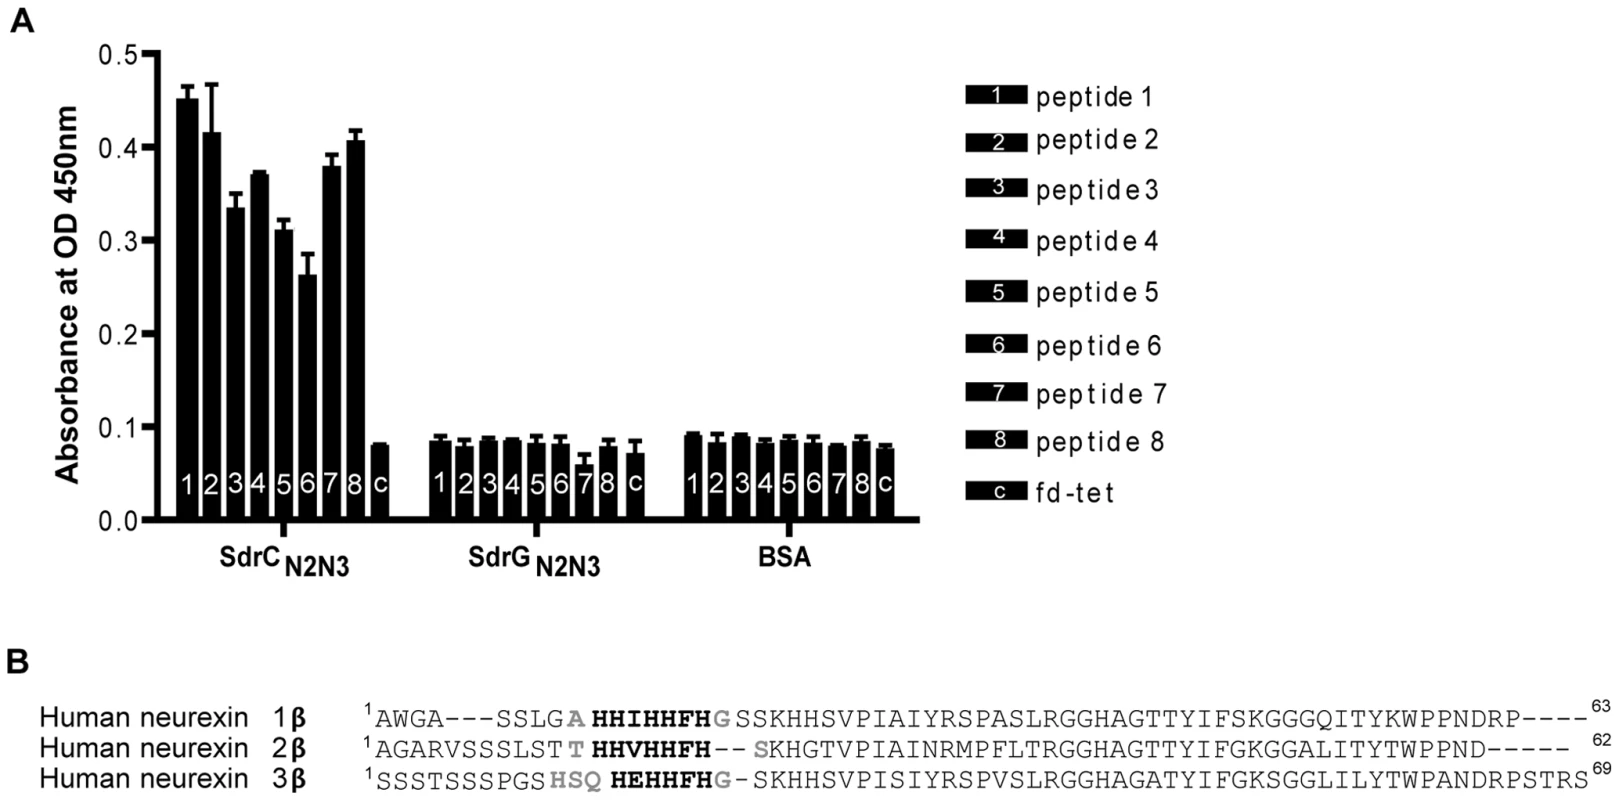 Identification of β-neurexins as the potential SdrC-binding partner.